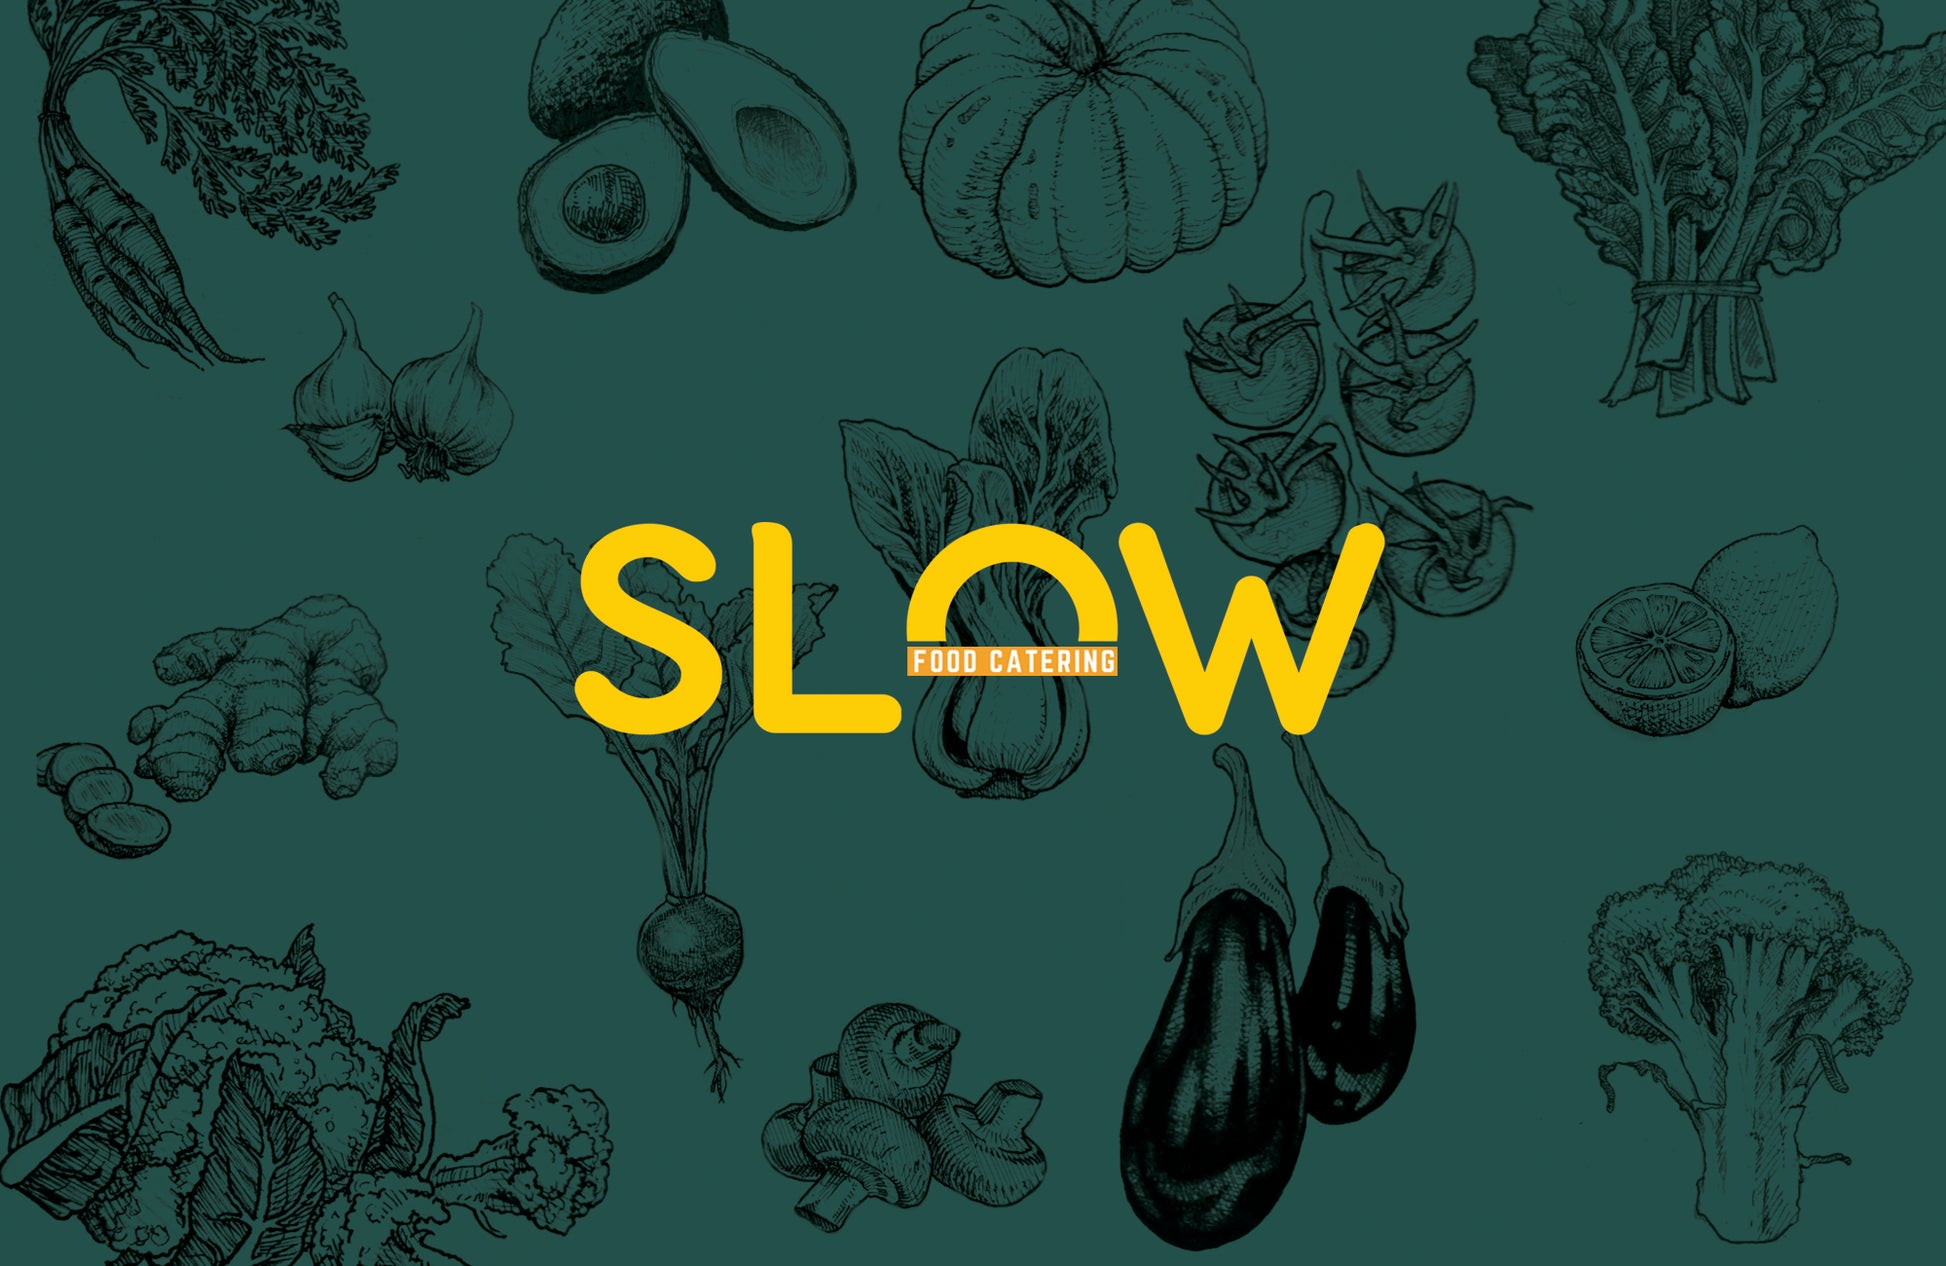 SLOW Food Gift Card SlowFoodCatering